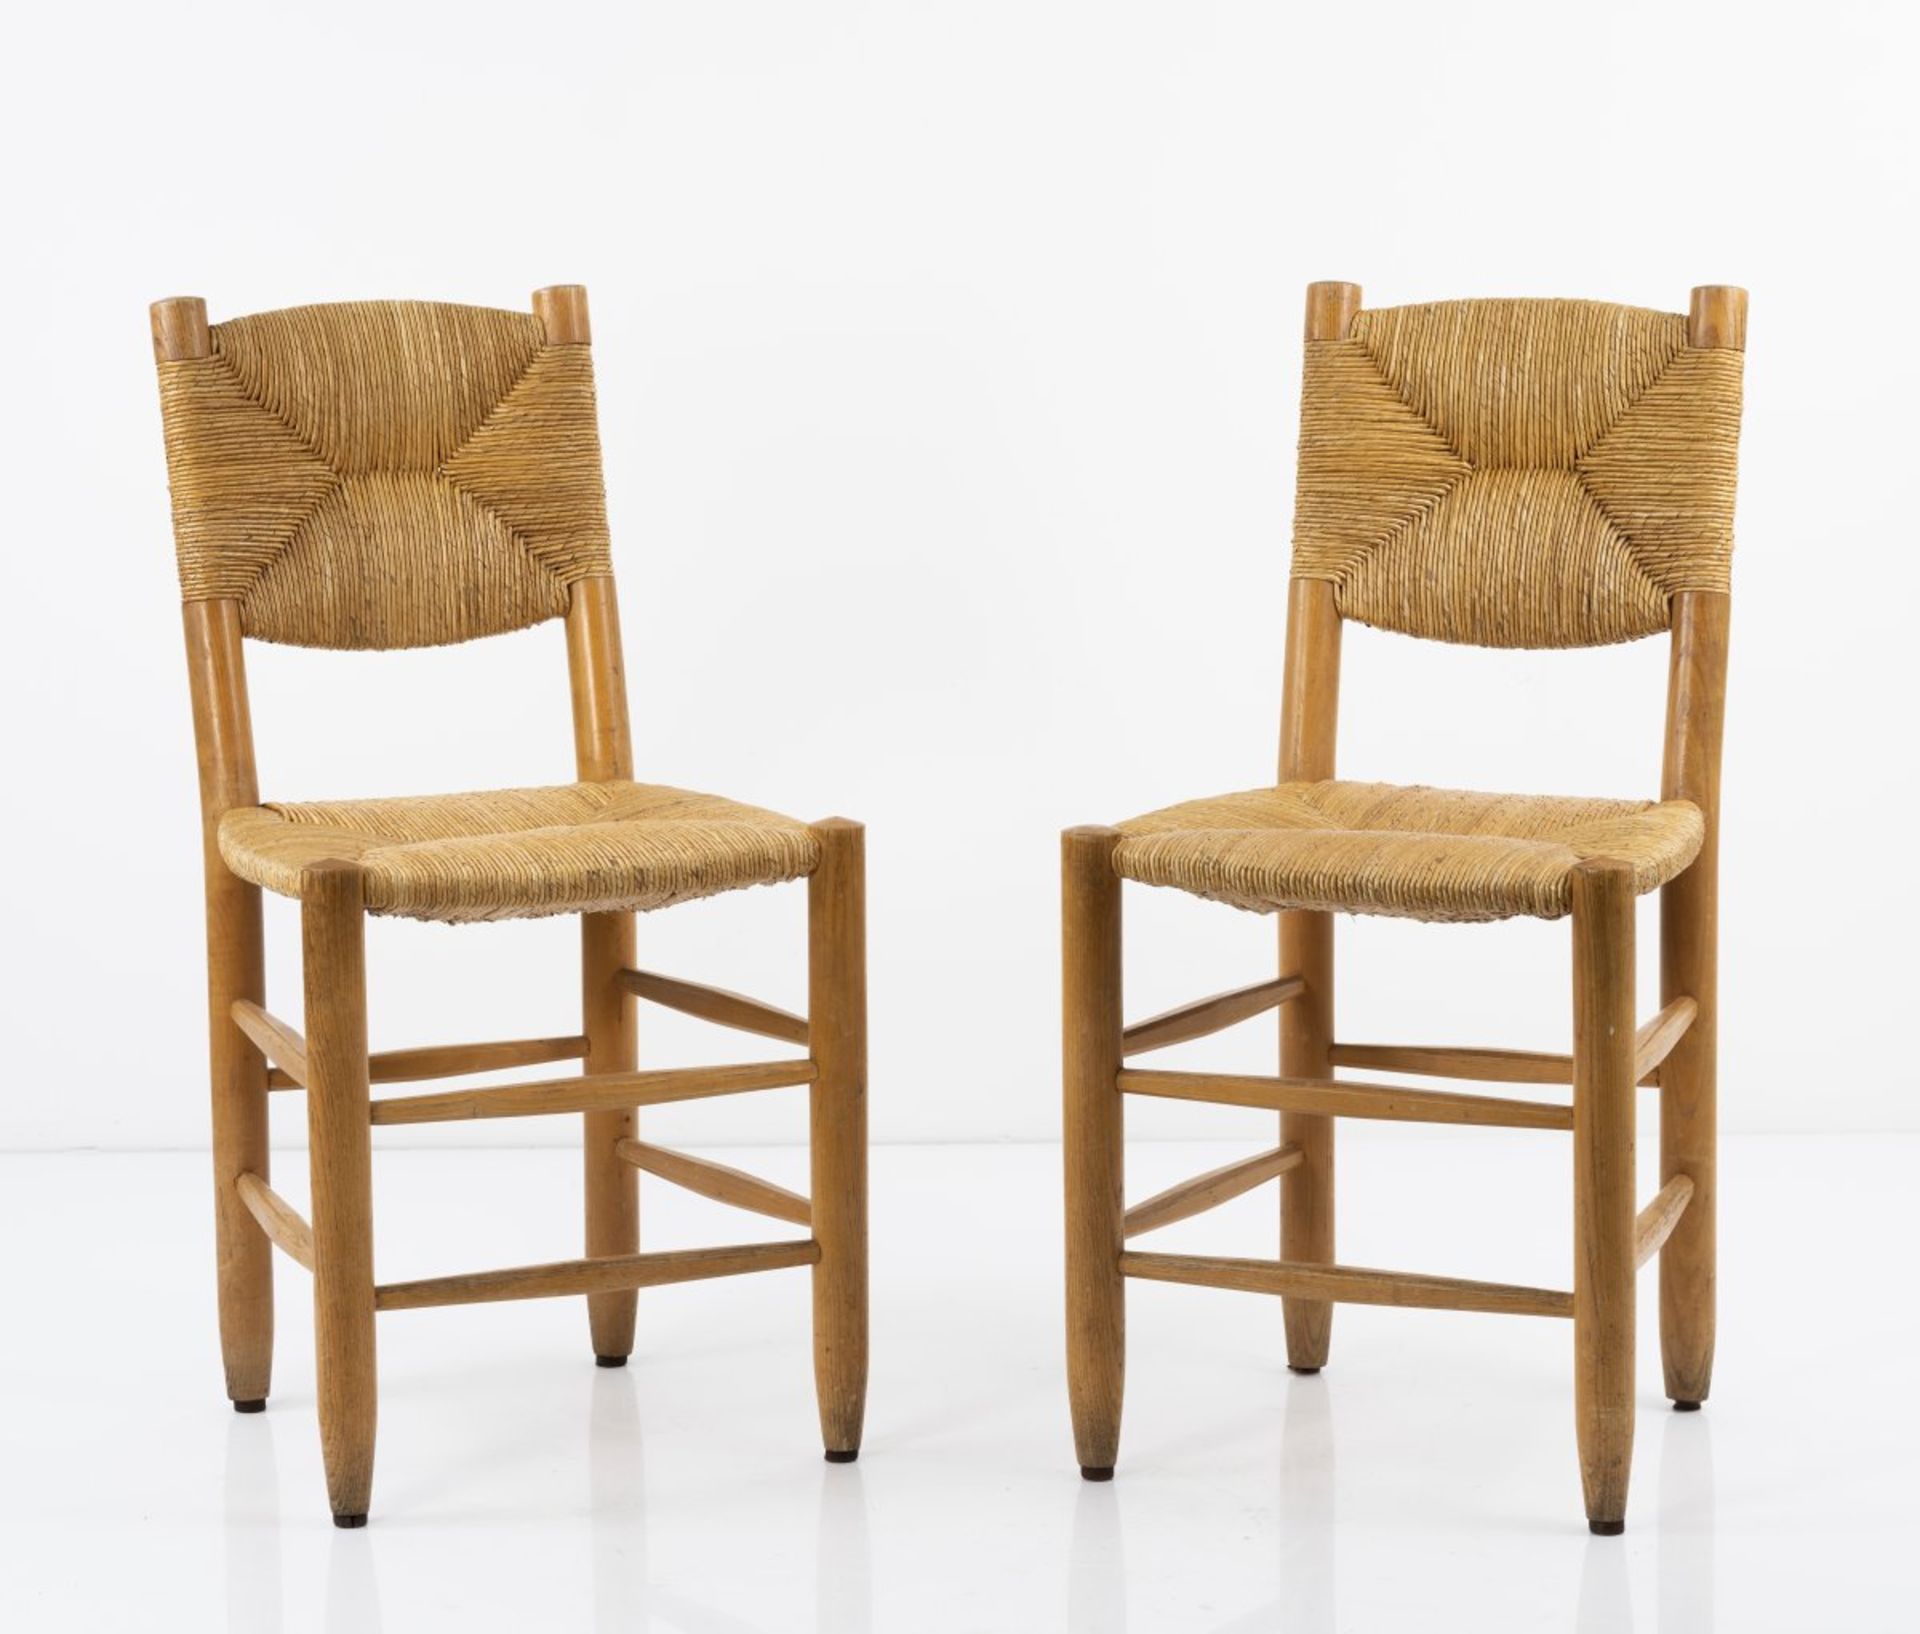 Charlotte Perriand, Set of two chairs, 1939